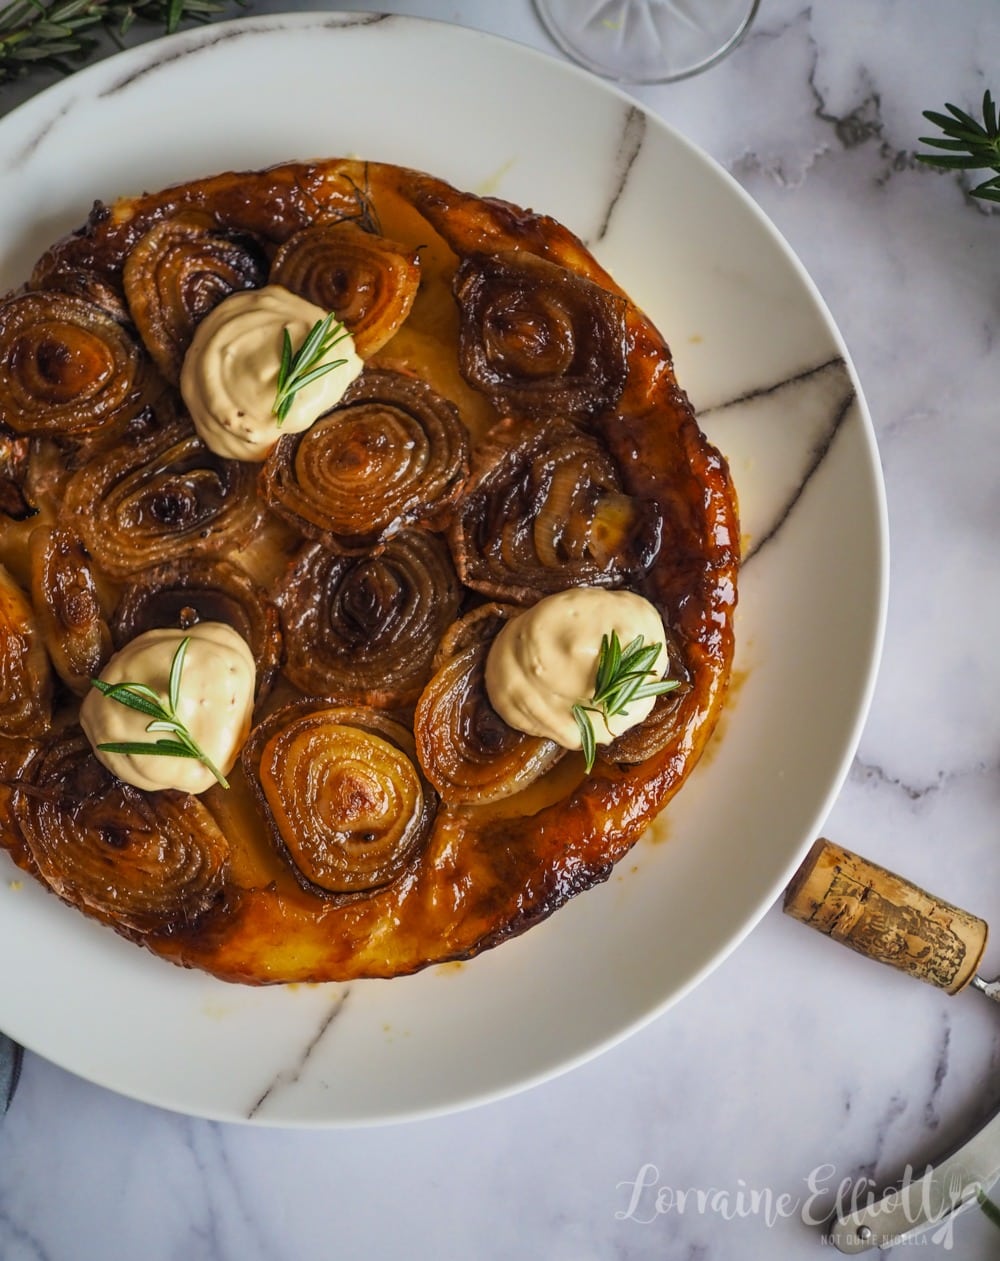 Top view of a pastry crust topped with rich, baked onions smothered in a syrupy sherry.